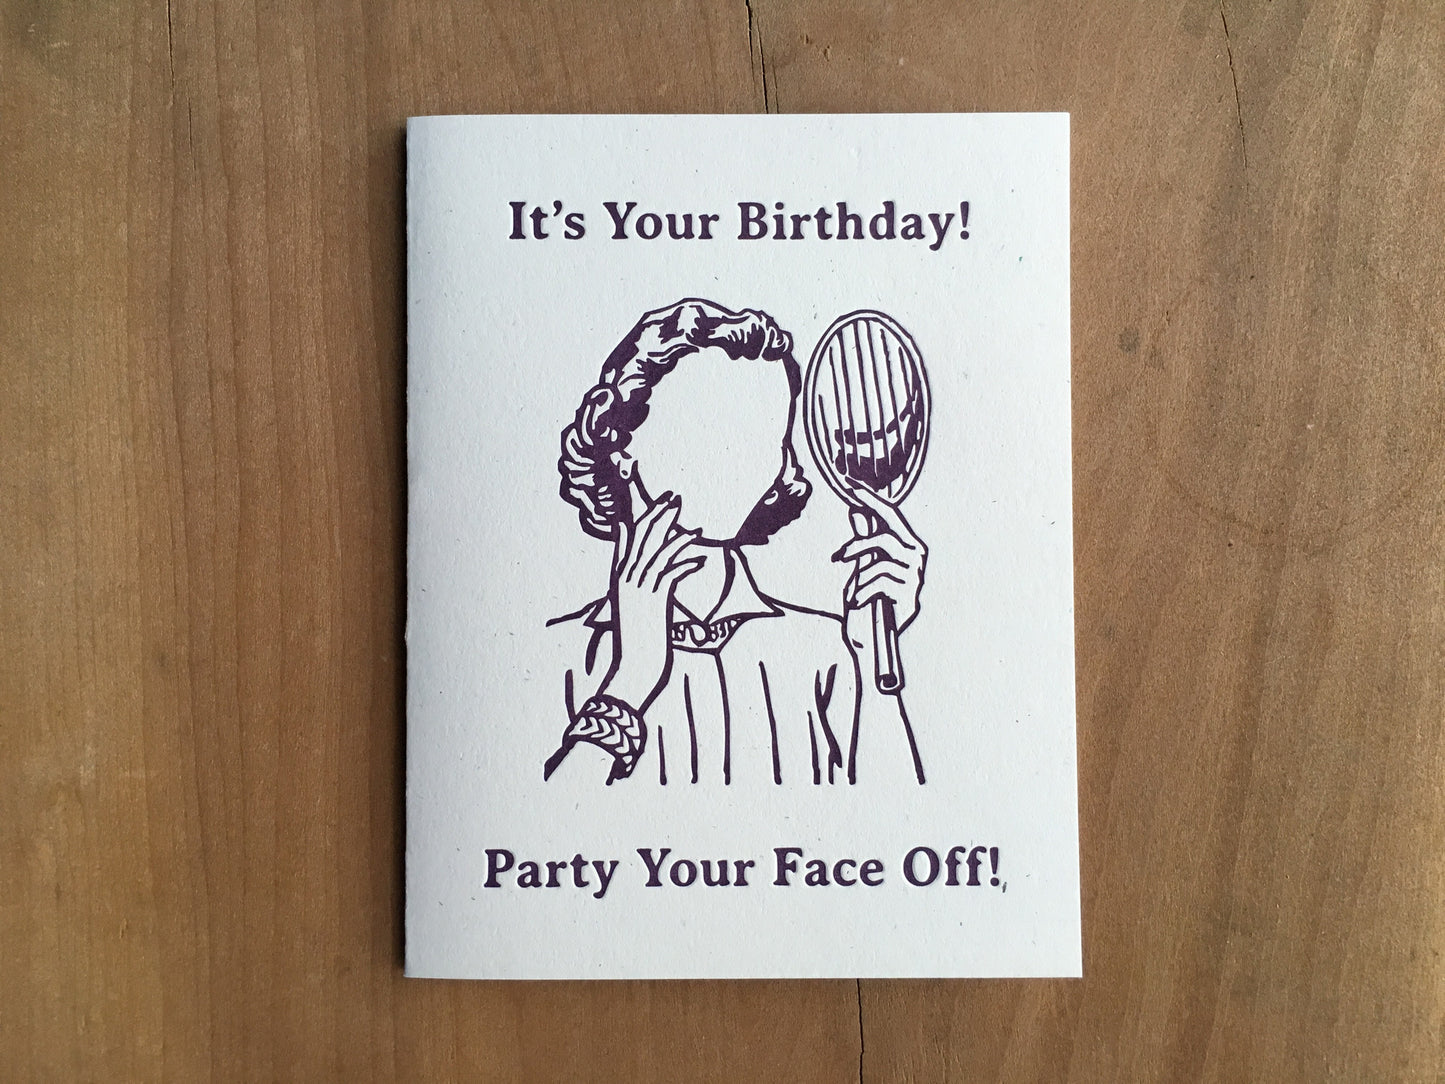 Party Your Face Off